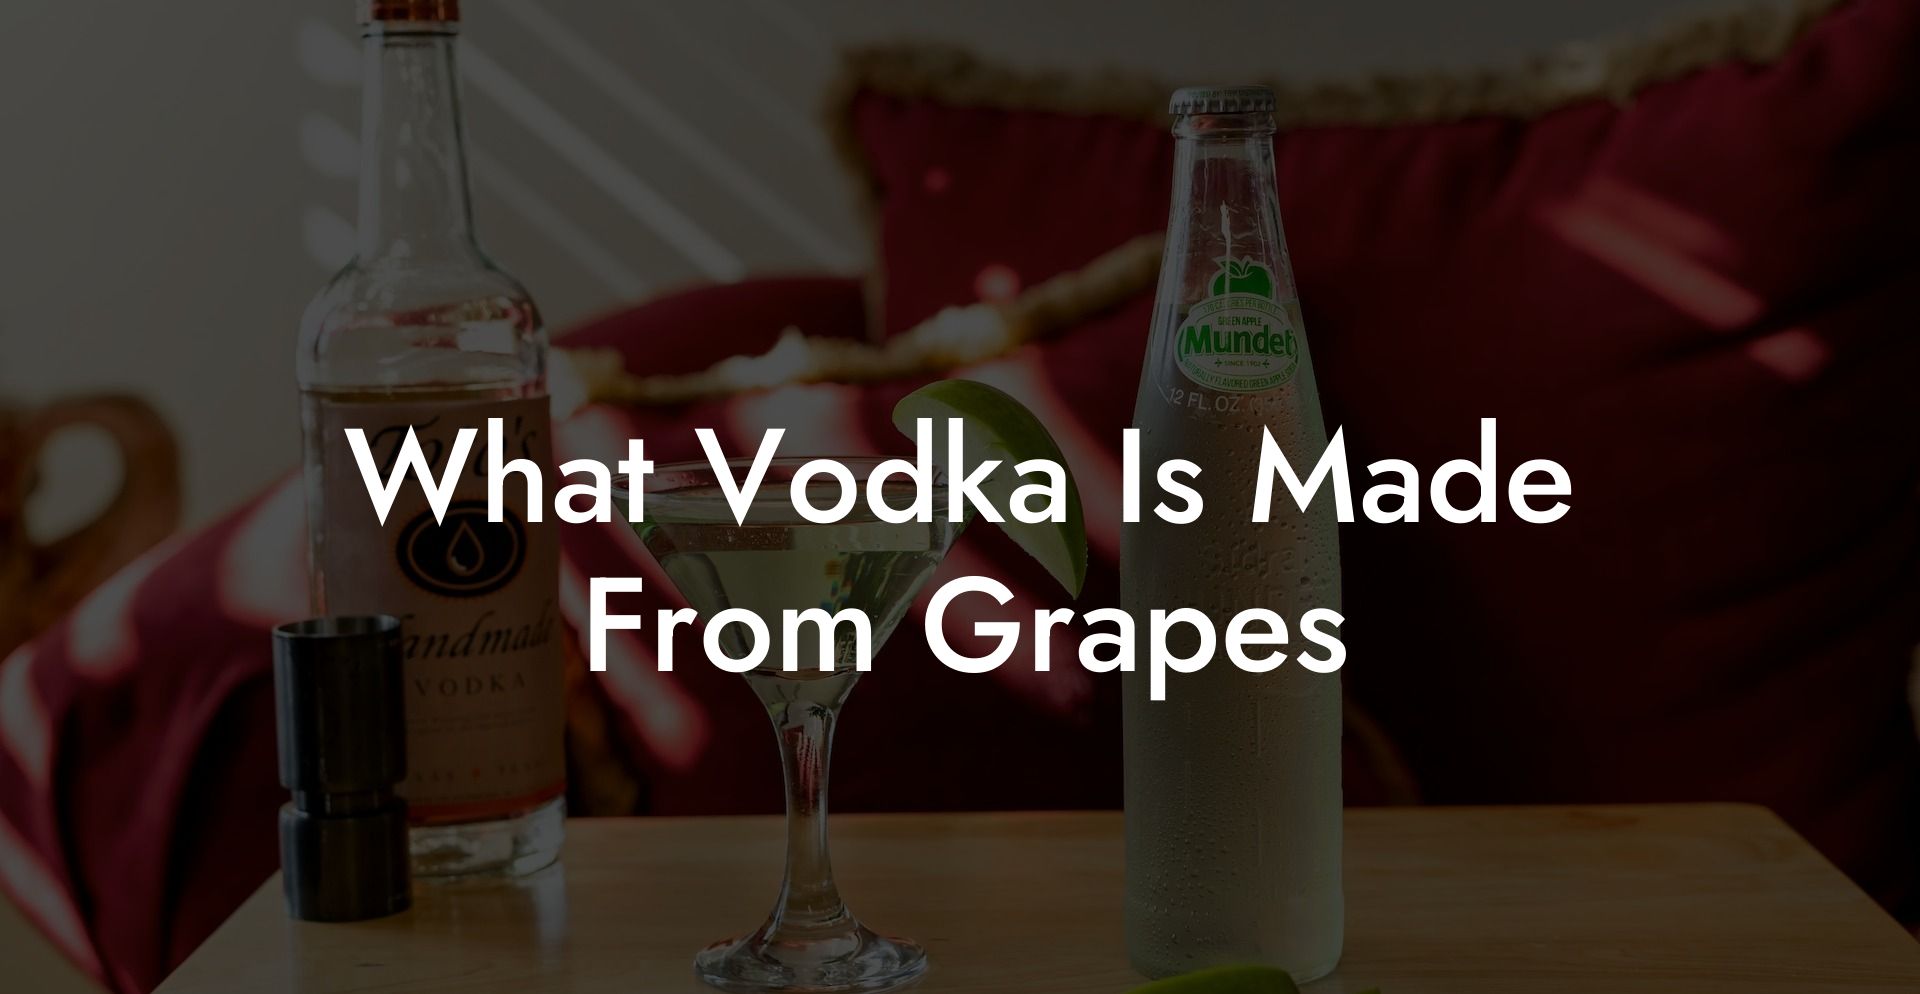 What Vodka Is Made From Grapes